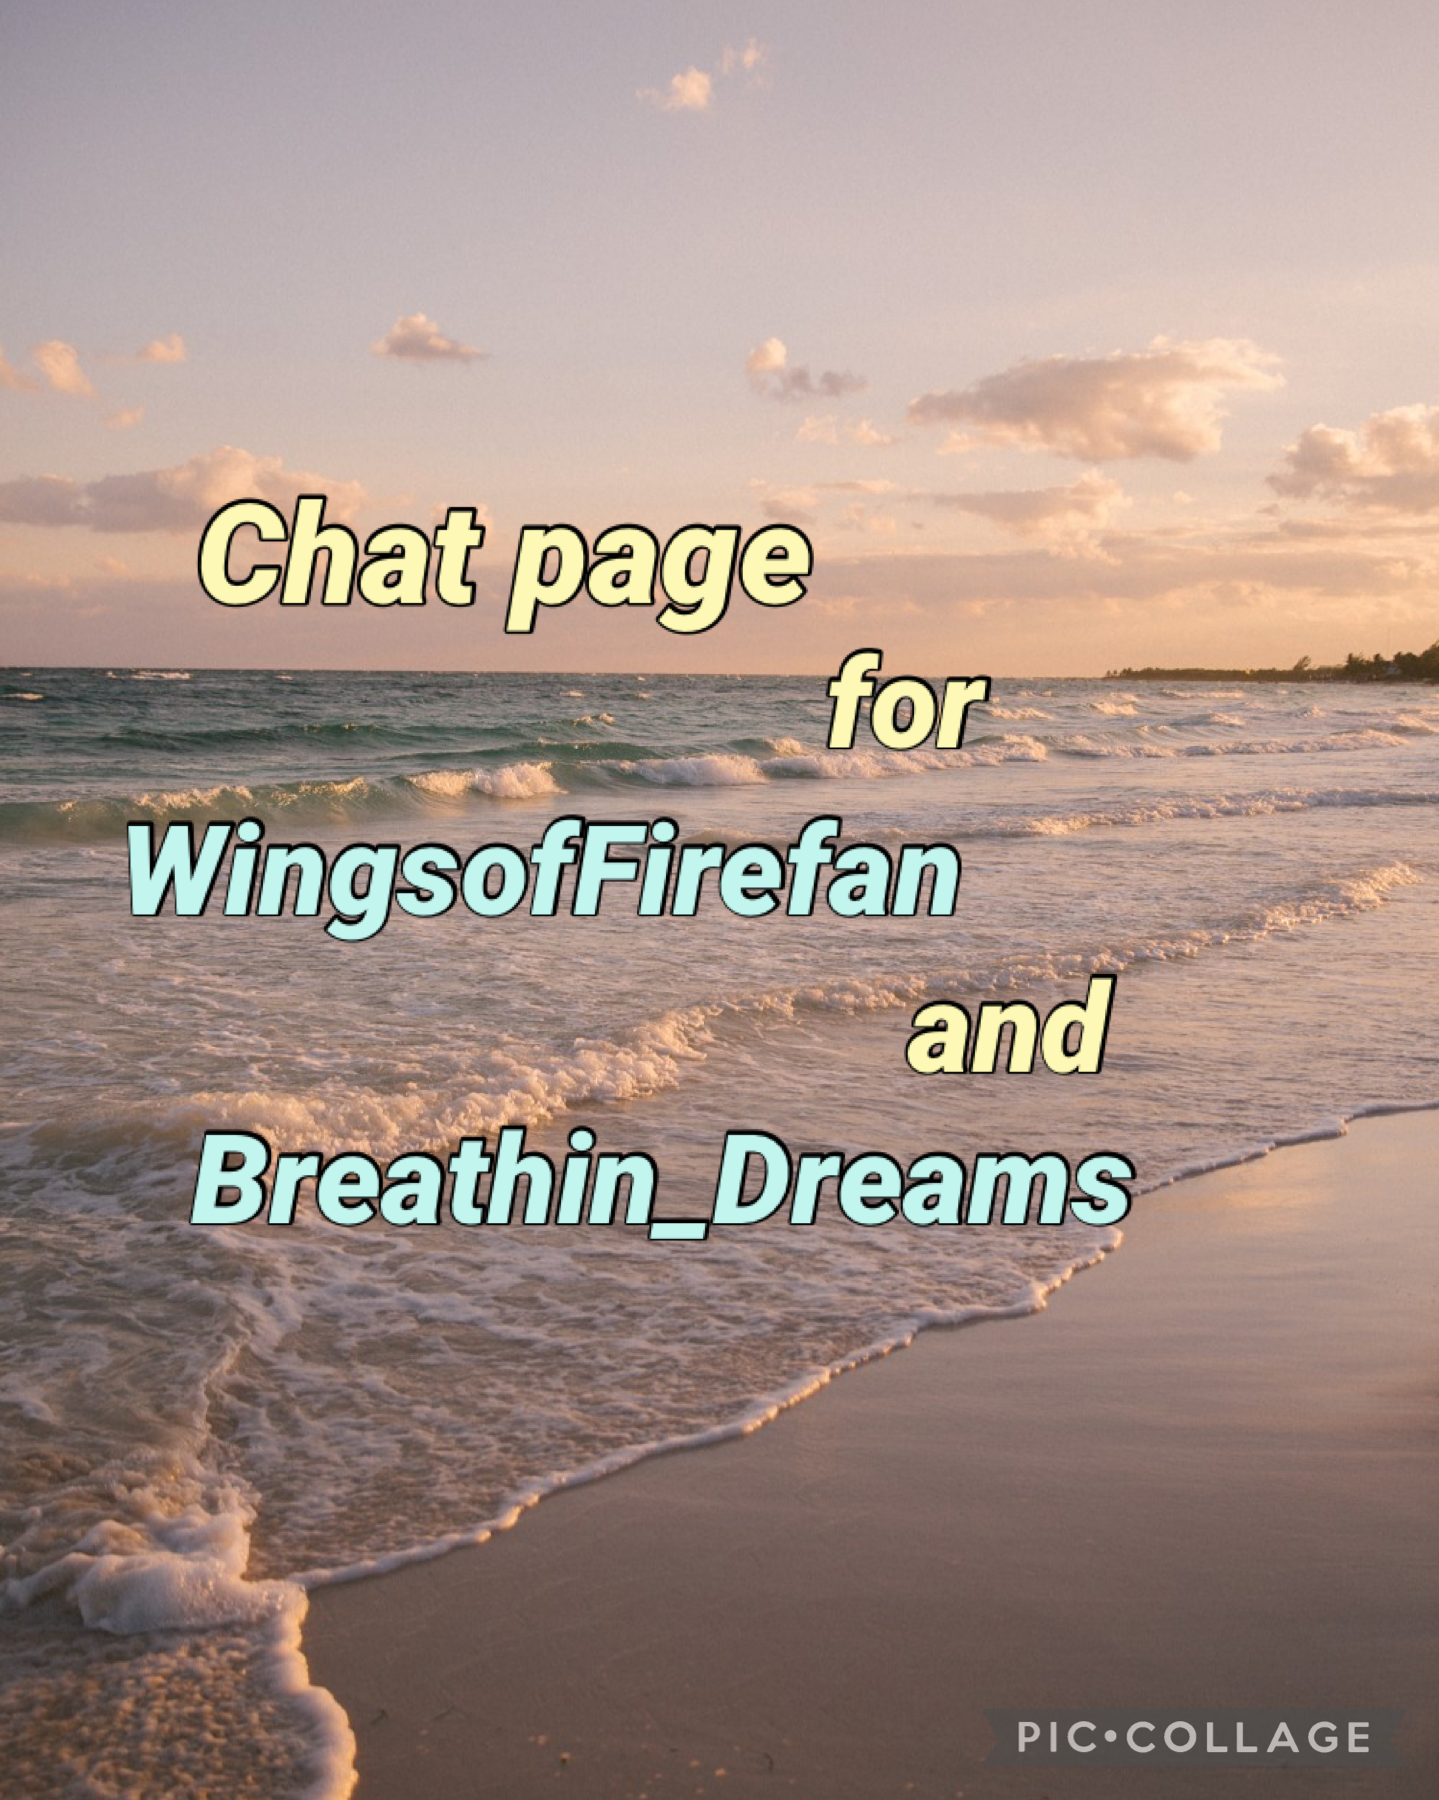 12.1.24 Chat page with WingsofFirefan